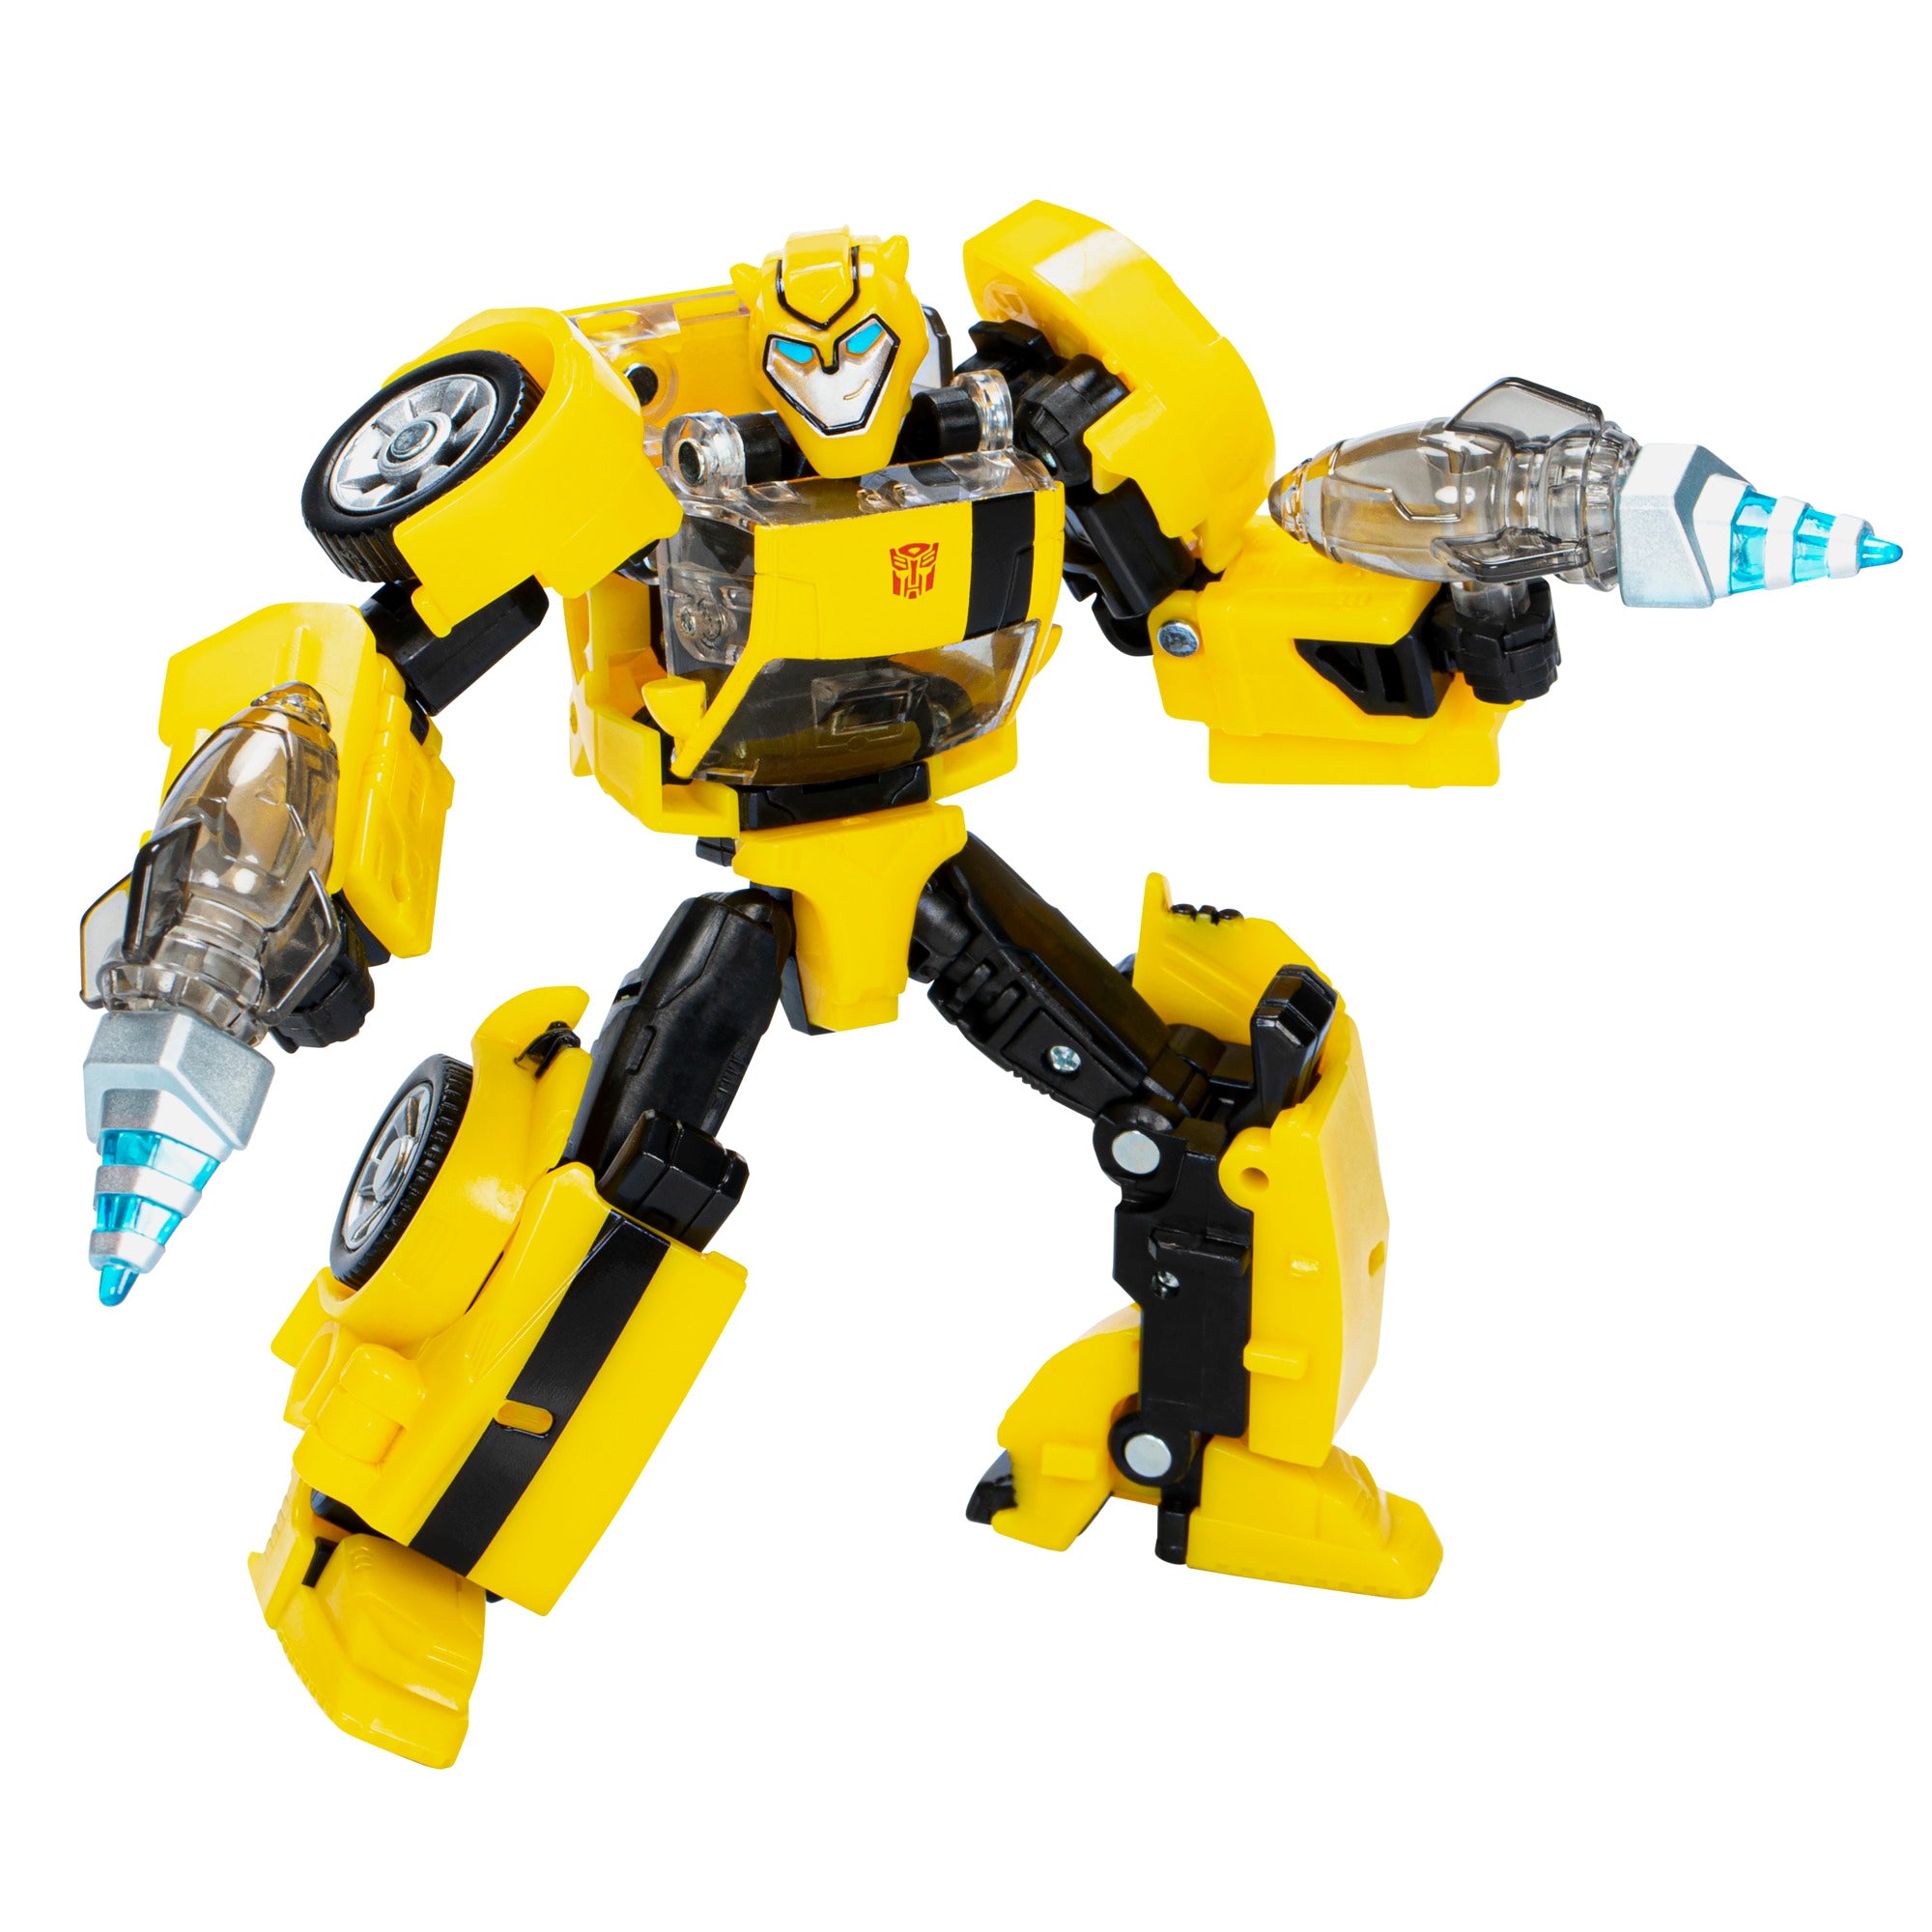 Transformers Generations Legacy United Series: Bumblebee Deluxe Class